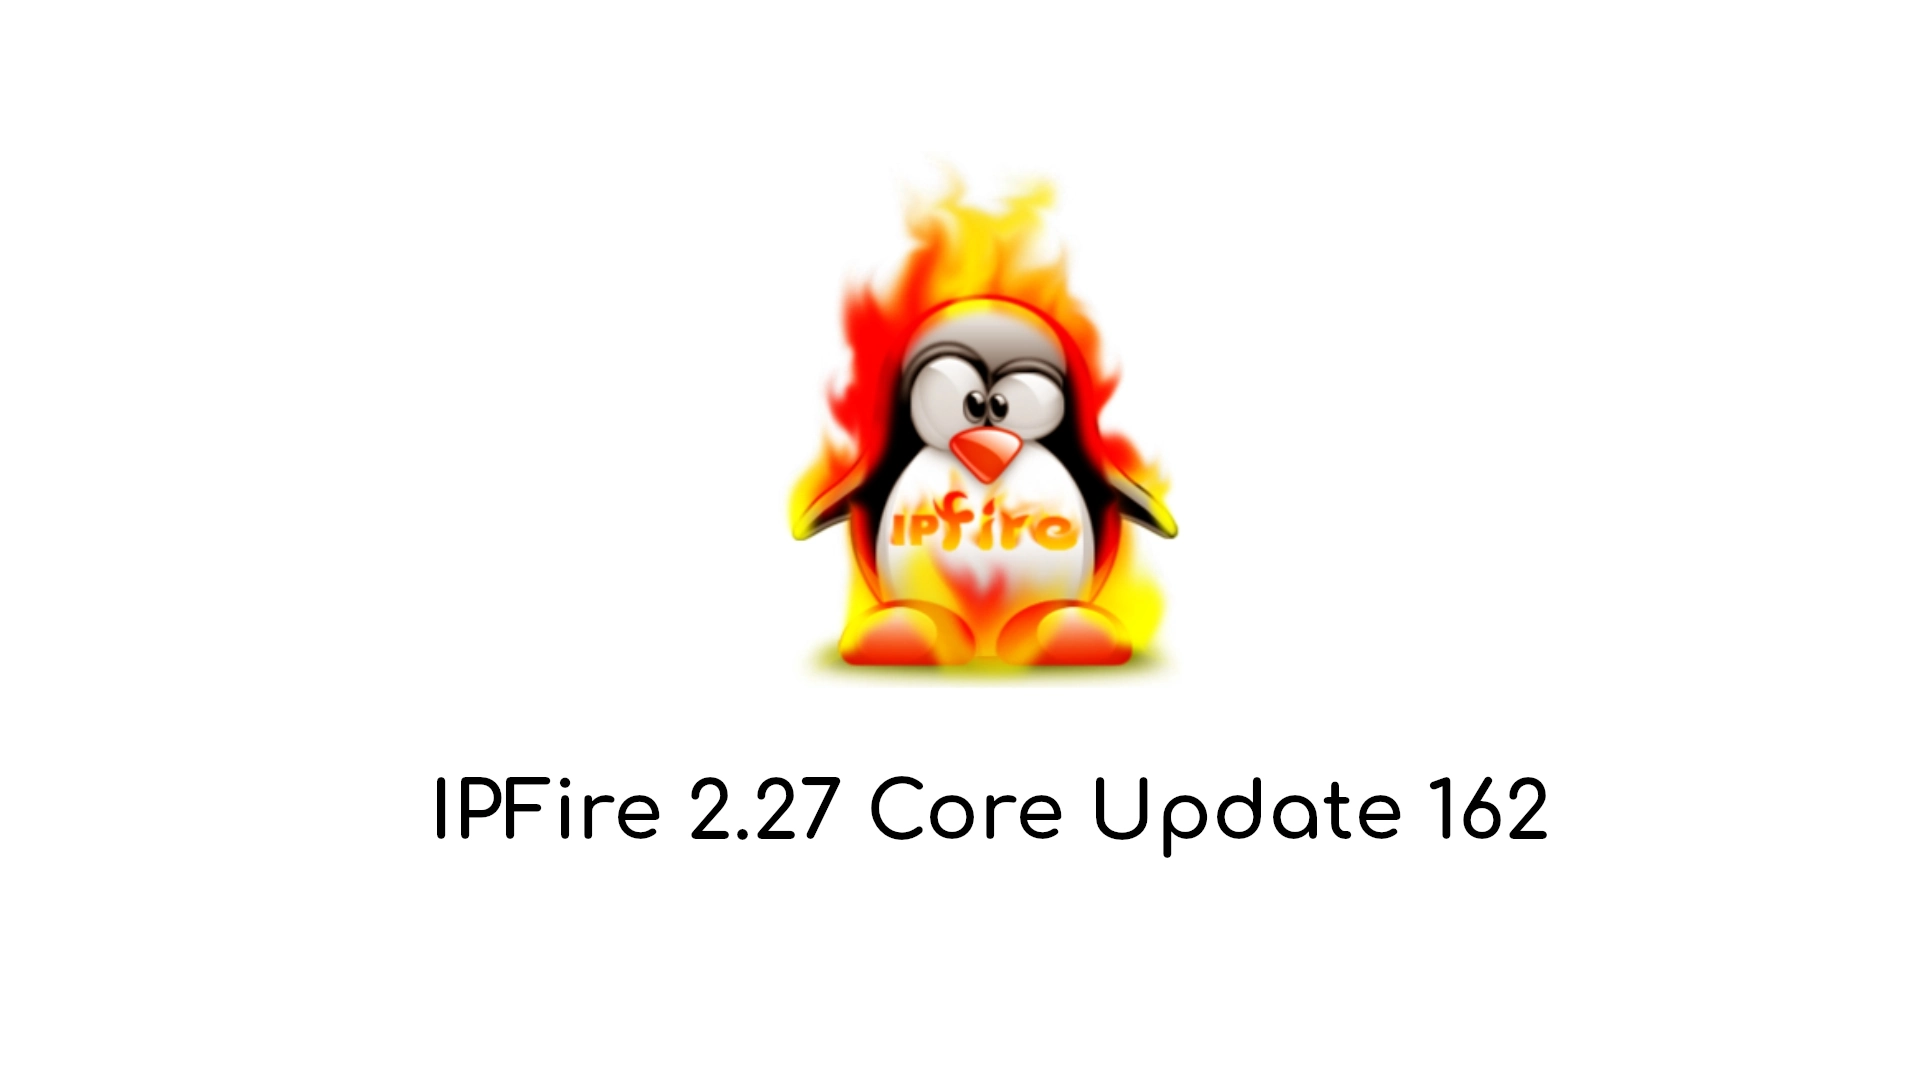 IPFire Linux Firewall Distro Is Now Powered by Linux Kernel 5.15 LTS